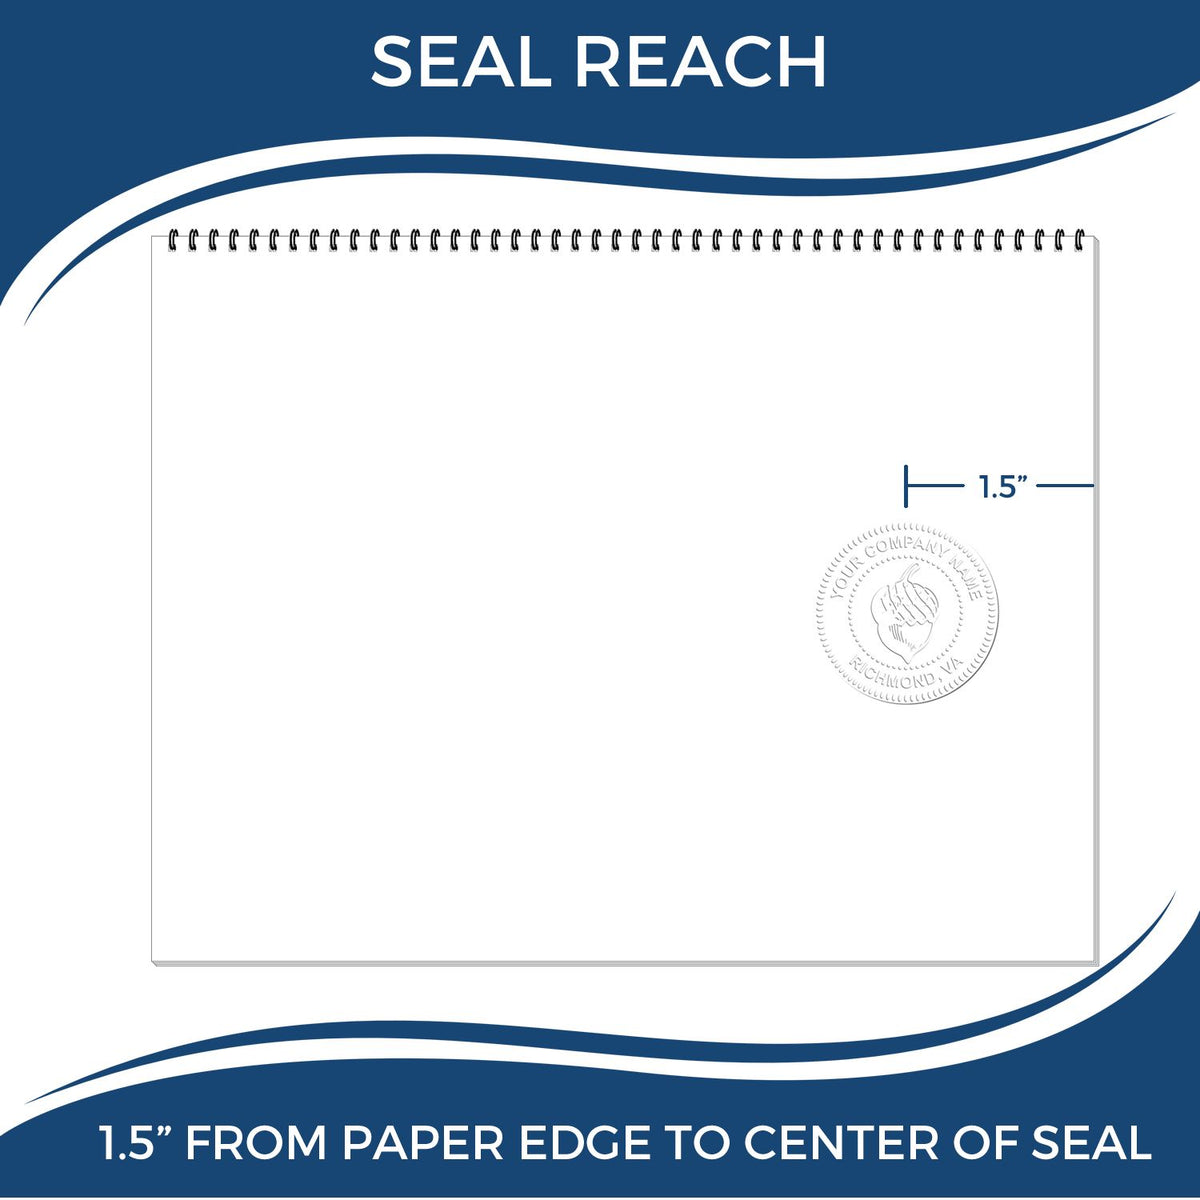 An infographic showing the seal reach which is represented by a ruler and a miniature seal image of the Soft Nebraska Professional Engineer Seal